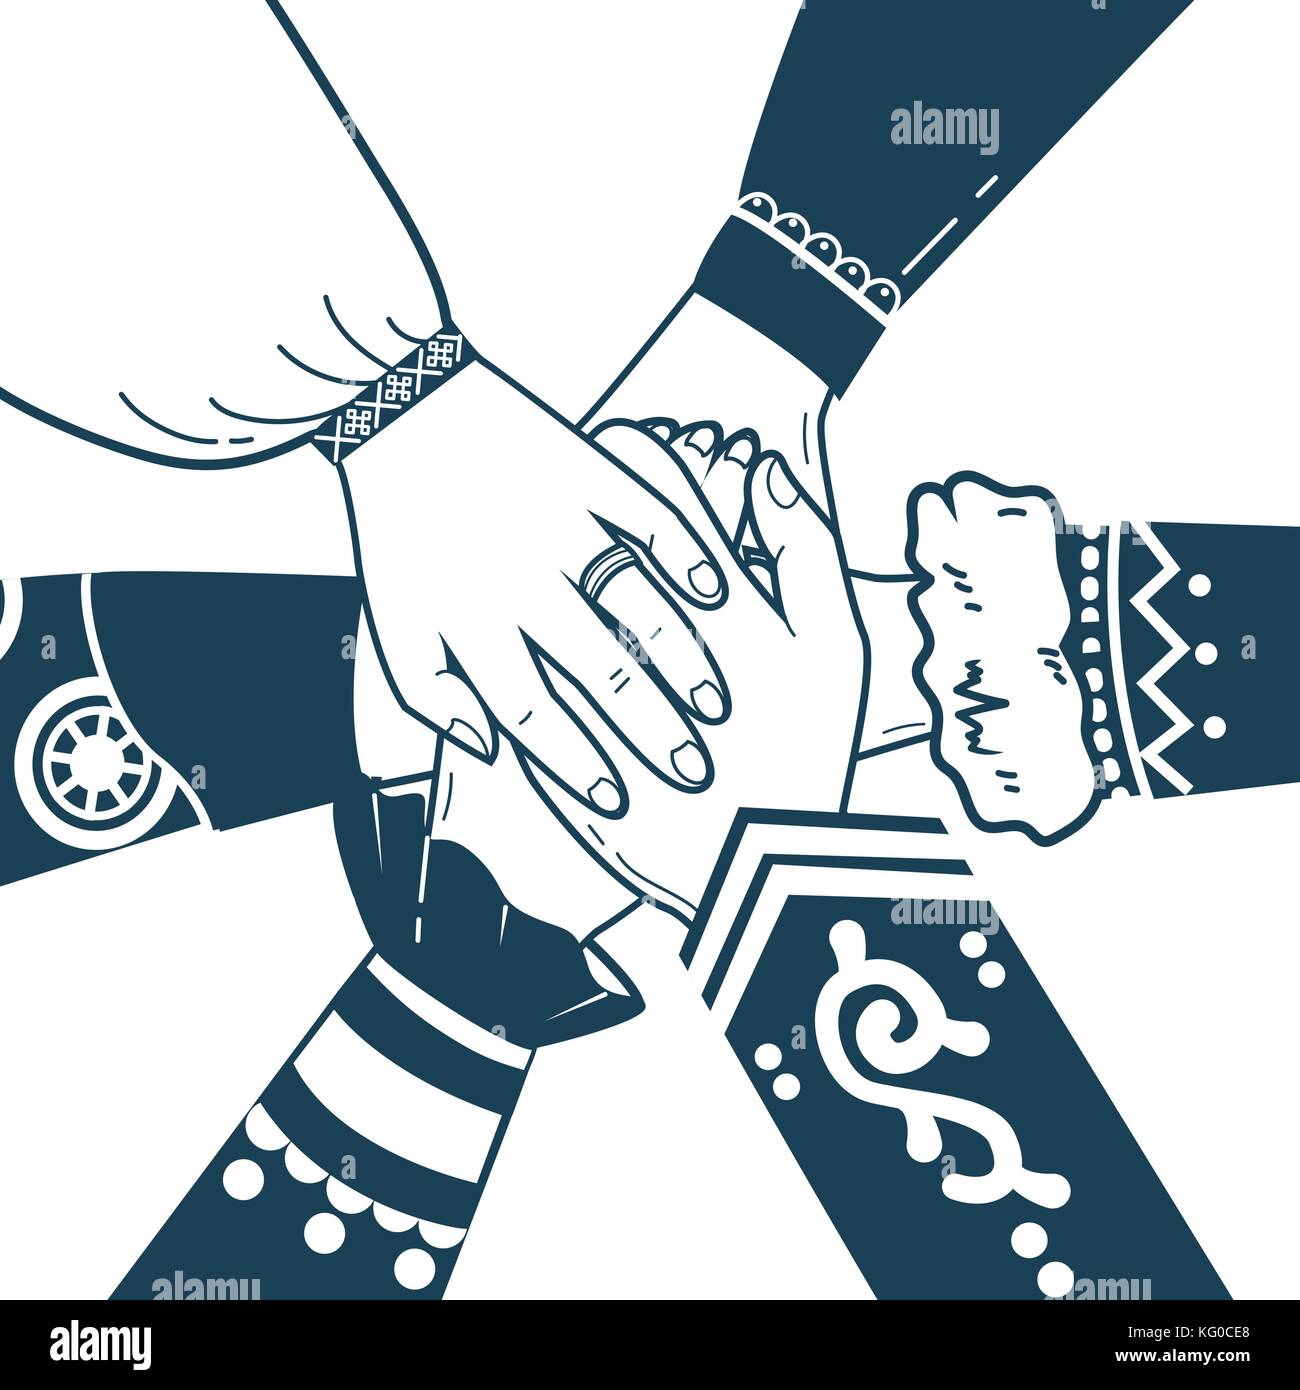 concept of unity, friendship, solidarity of the people in the form of hands that in the form of people in national costumes making pile of hands.  ico Stock Vector